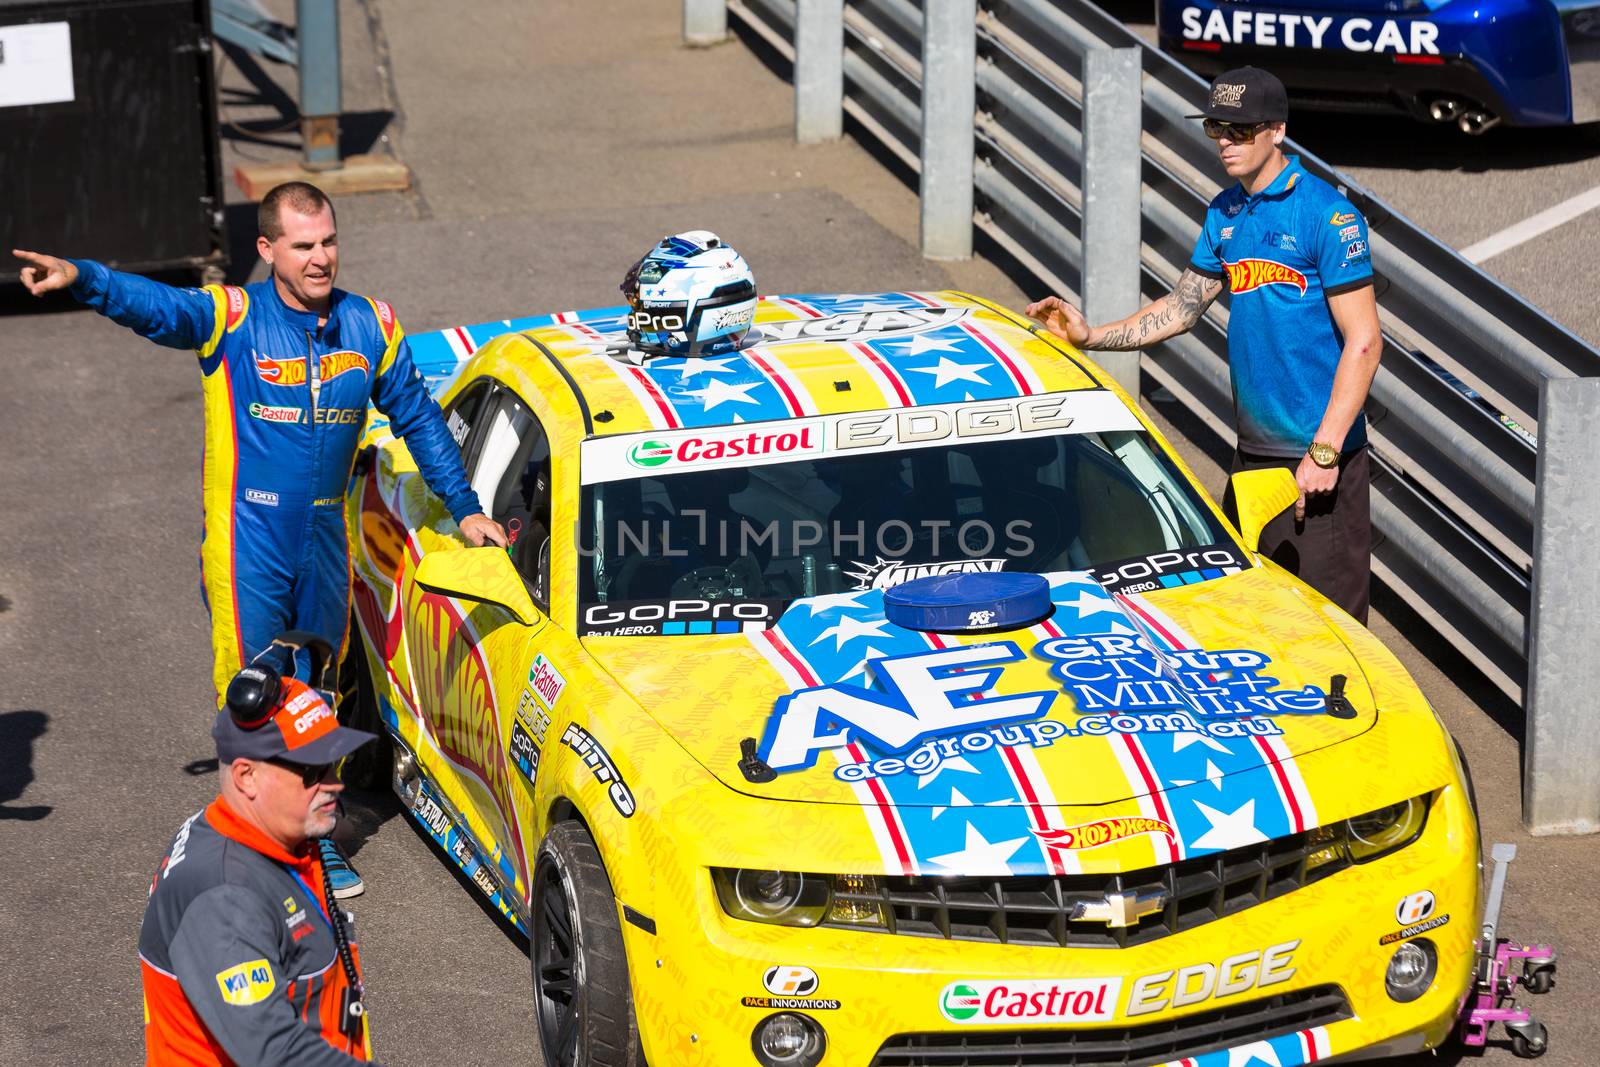 PHILLIP ISLAND, MELBOURNE/AUSTRALIA - 17 APRIL 2016: The Hot Wheels team get ready to entertain the crowds at the WD-40 Phillip Island Supersprint.